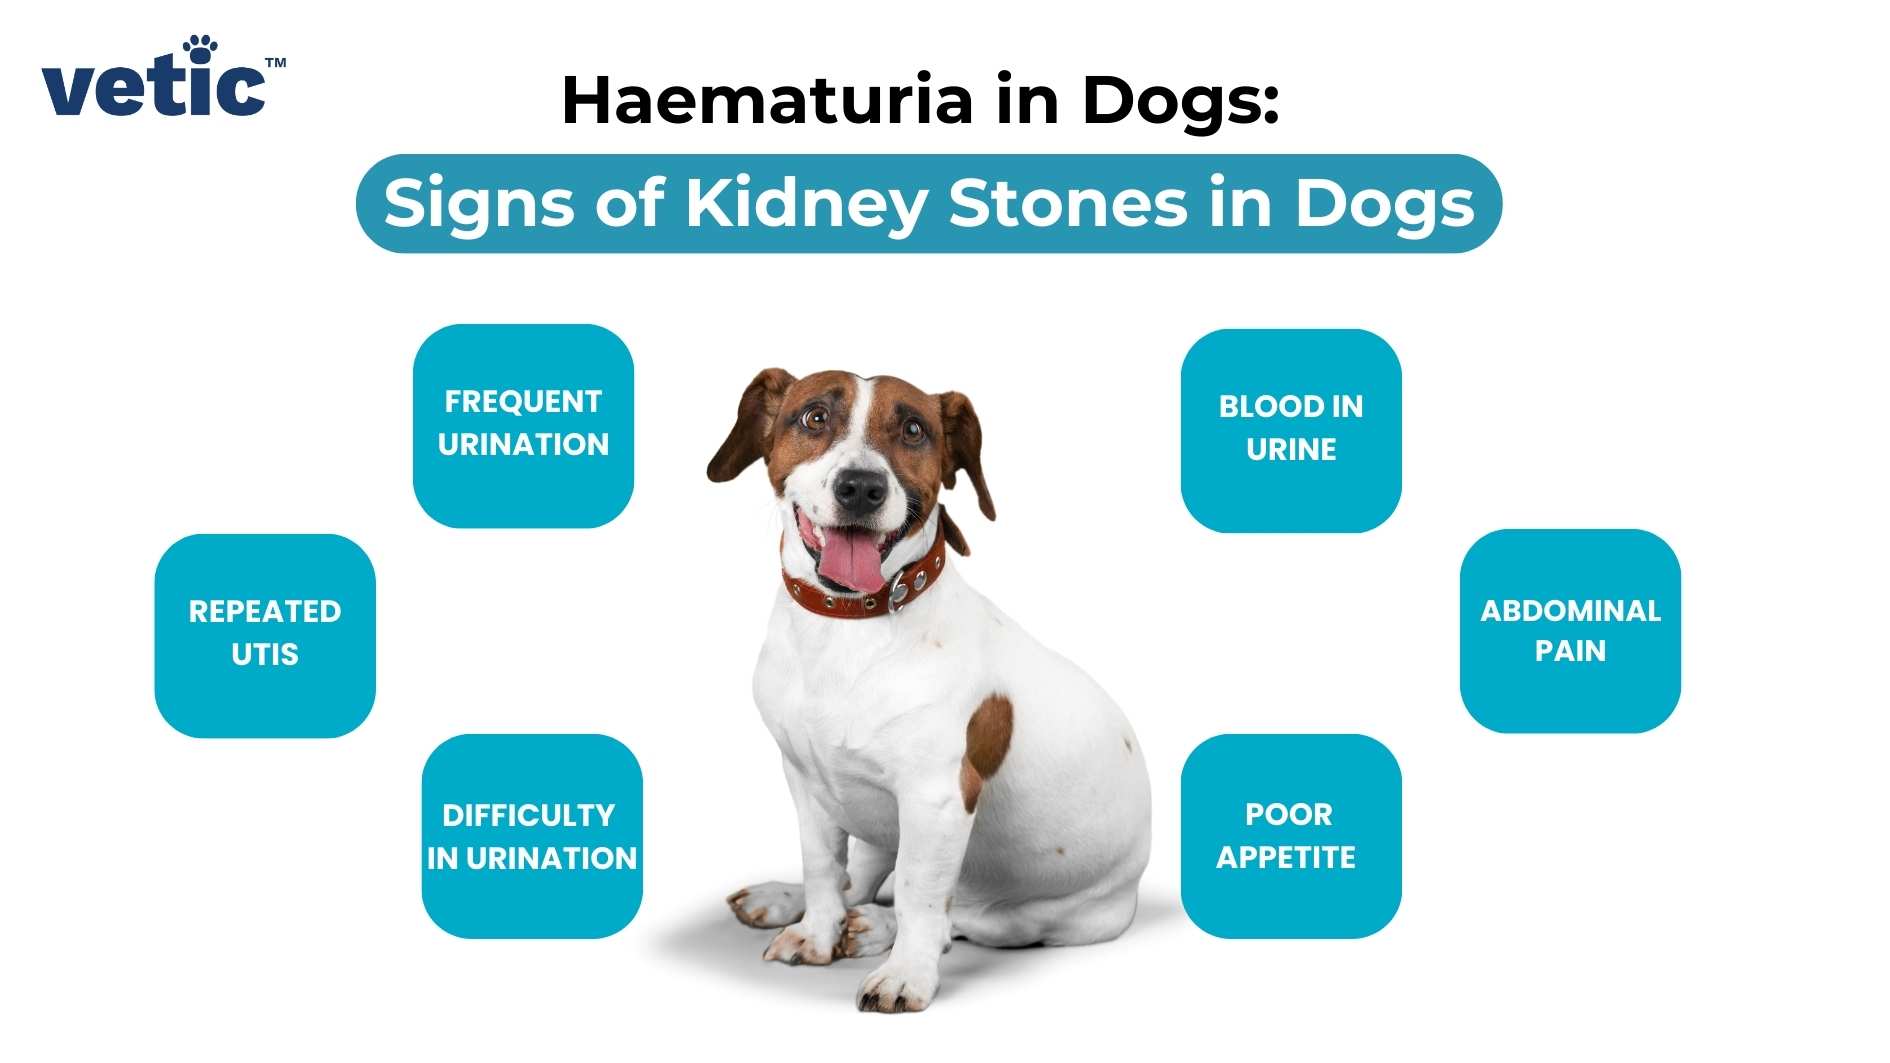 Haematuria in dogs can also be a sign of kidney stone in dogs. Look for other signs such as frequent urination, repeated UTIs, abdominal pain, difficulty in urination and incontinence.